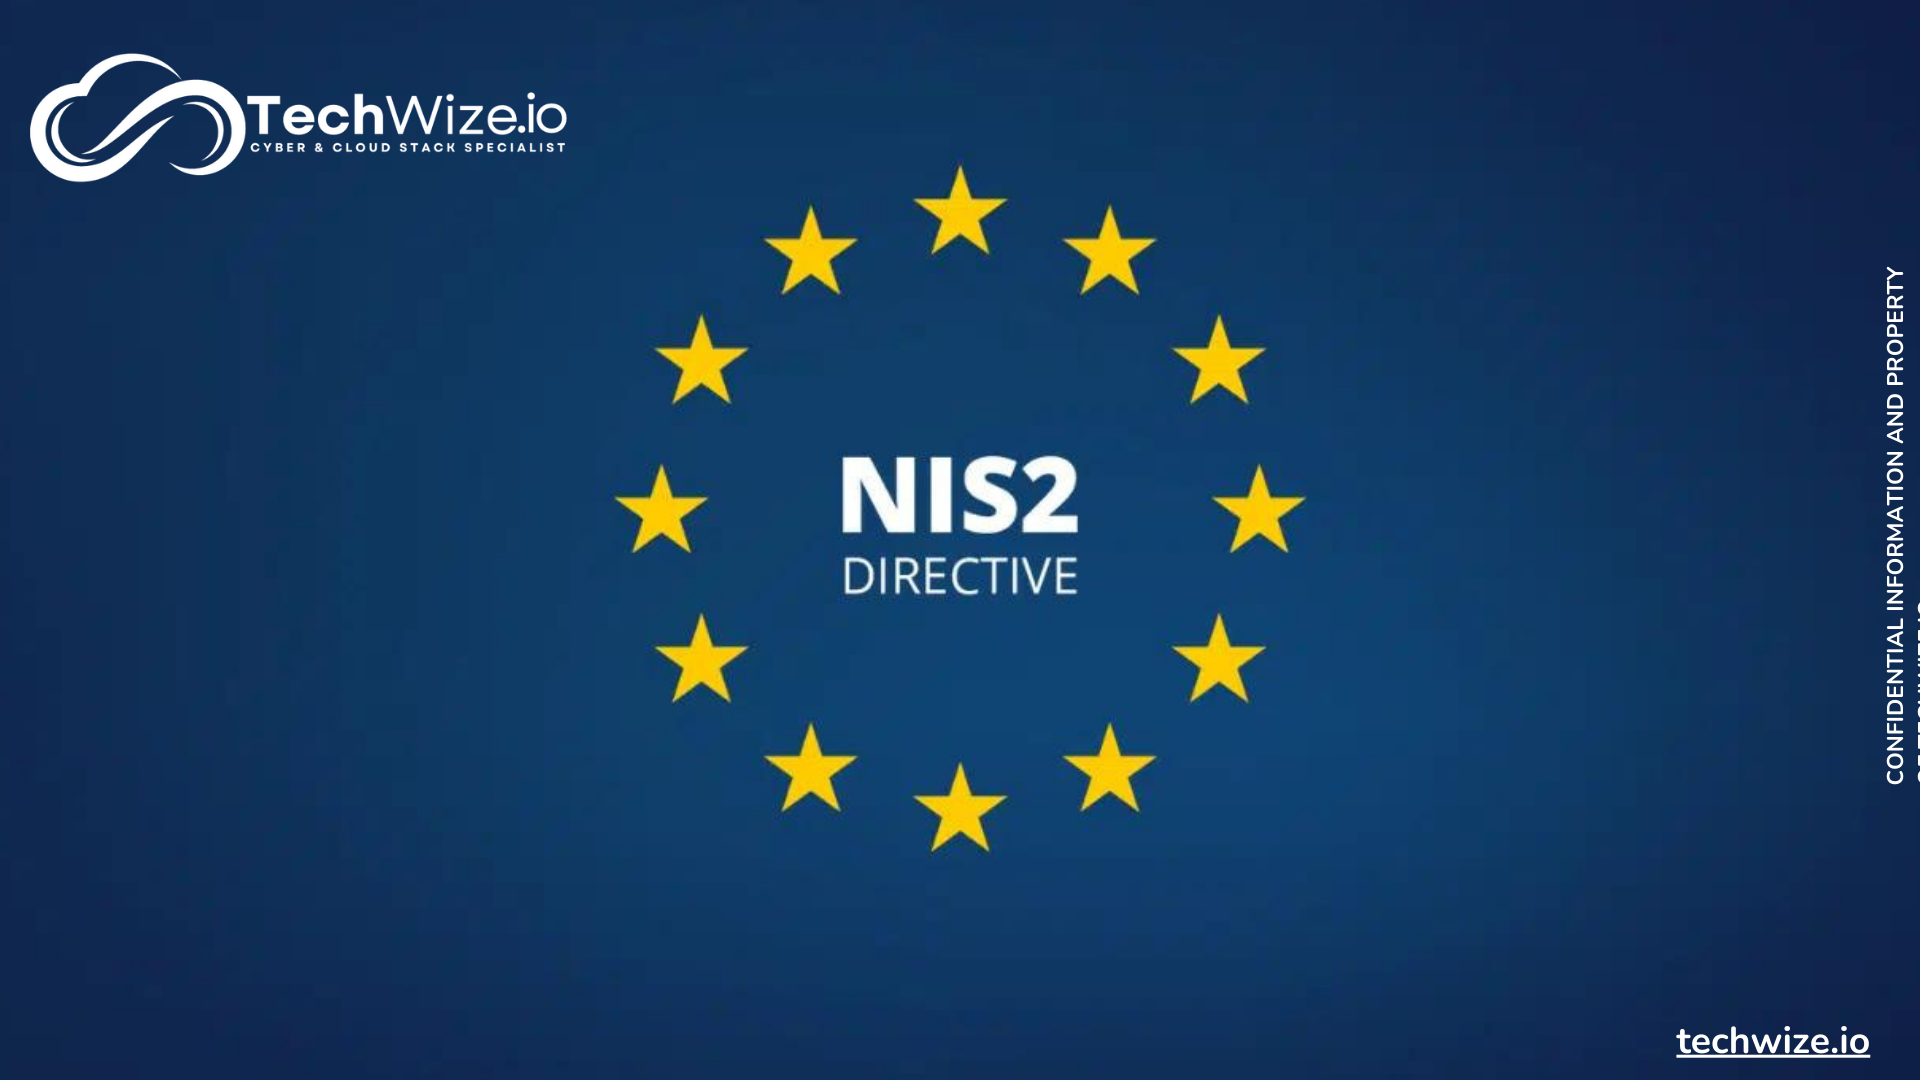 NIS2: Strengthening Cybersecurity in Europe for a Safer Digital Future